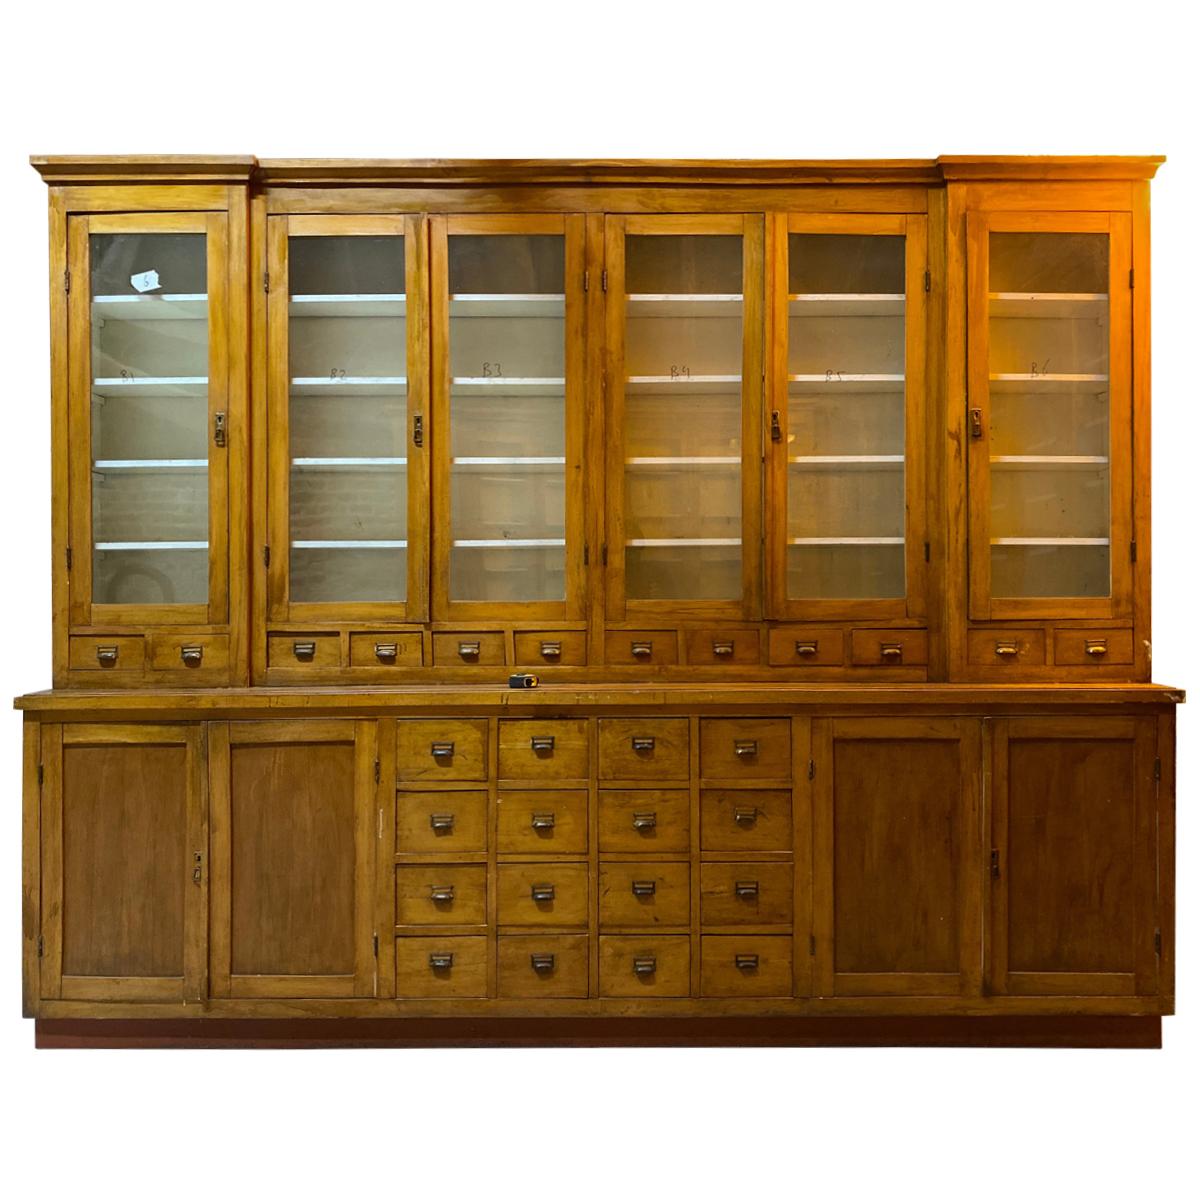 Large Apothecary Display Cabinet Pharmacy Chemist Shop circa 1920s Number 2